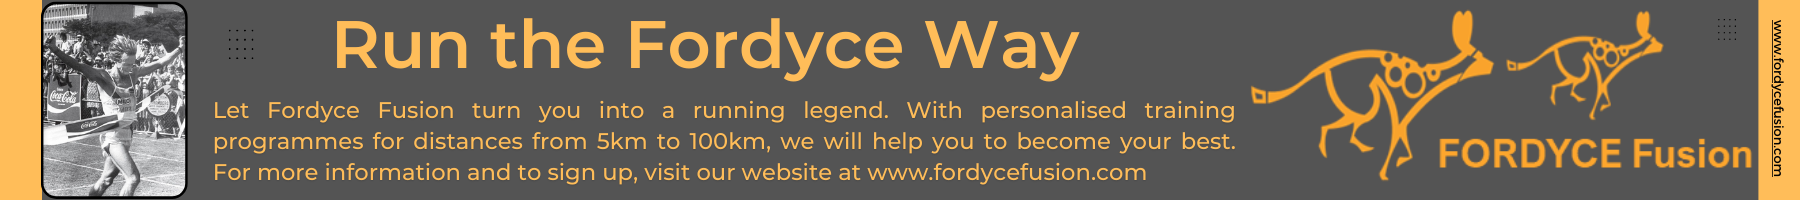 Fordyce Fusion banner 1